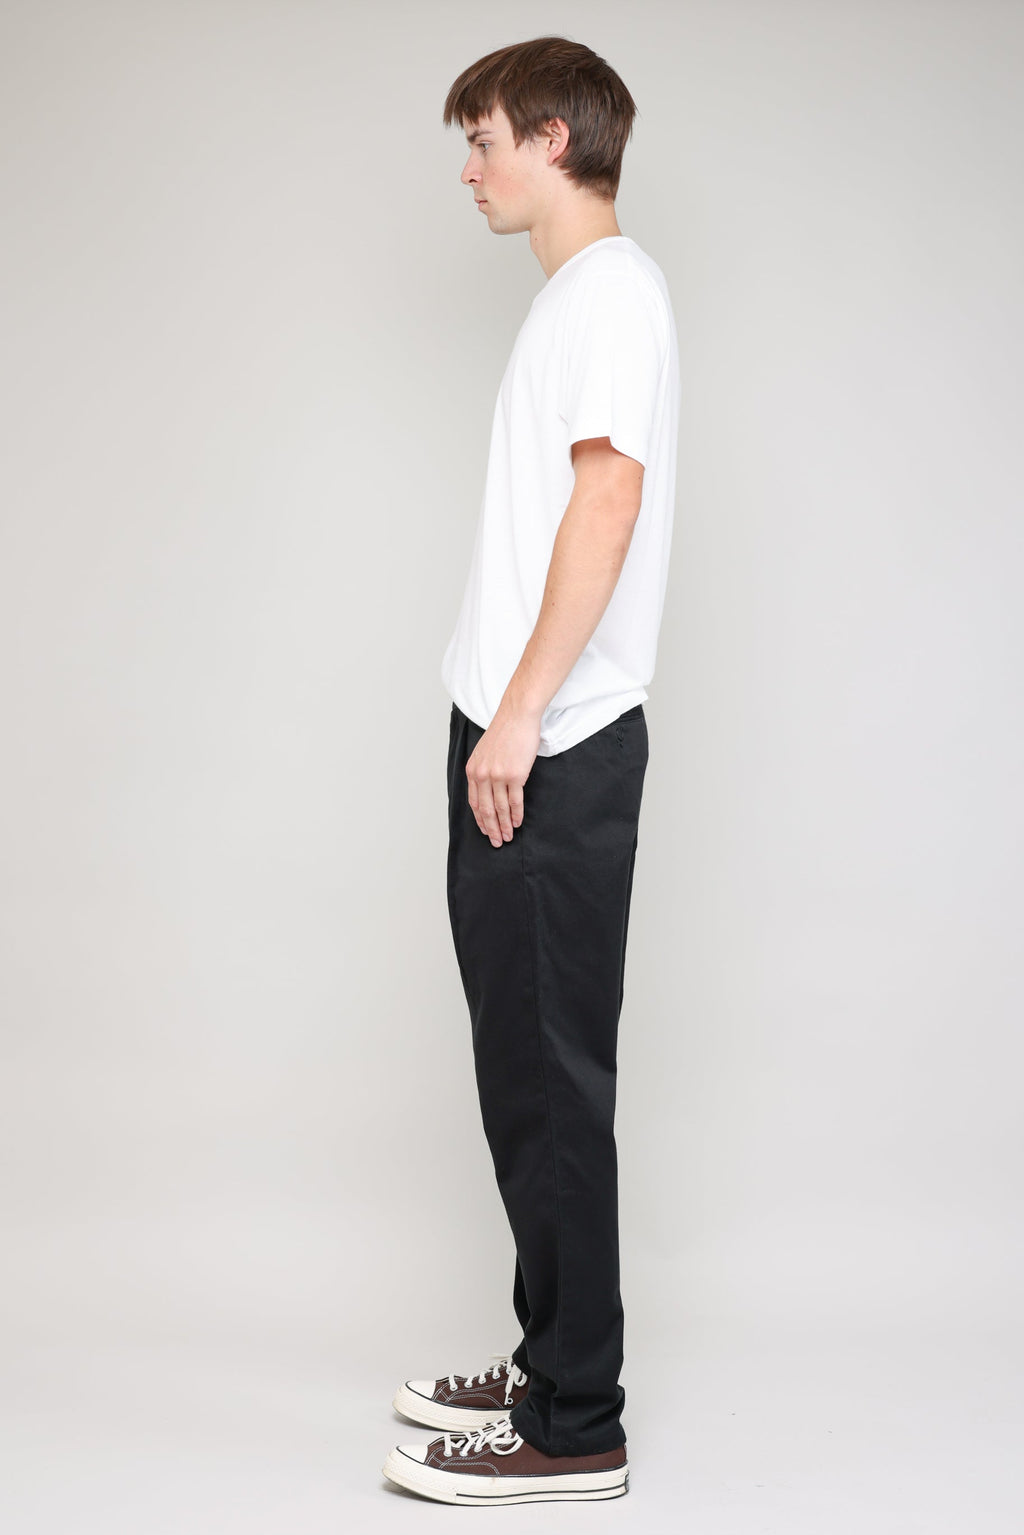 Pleated Chino Texture Cloth in Black 05